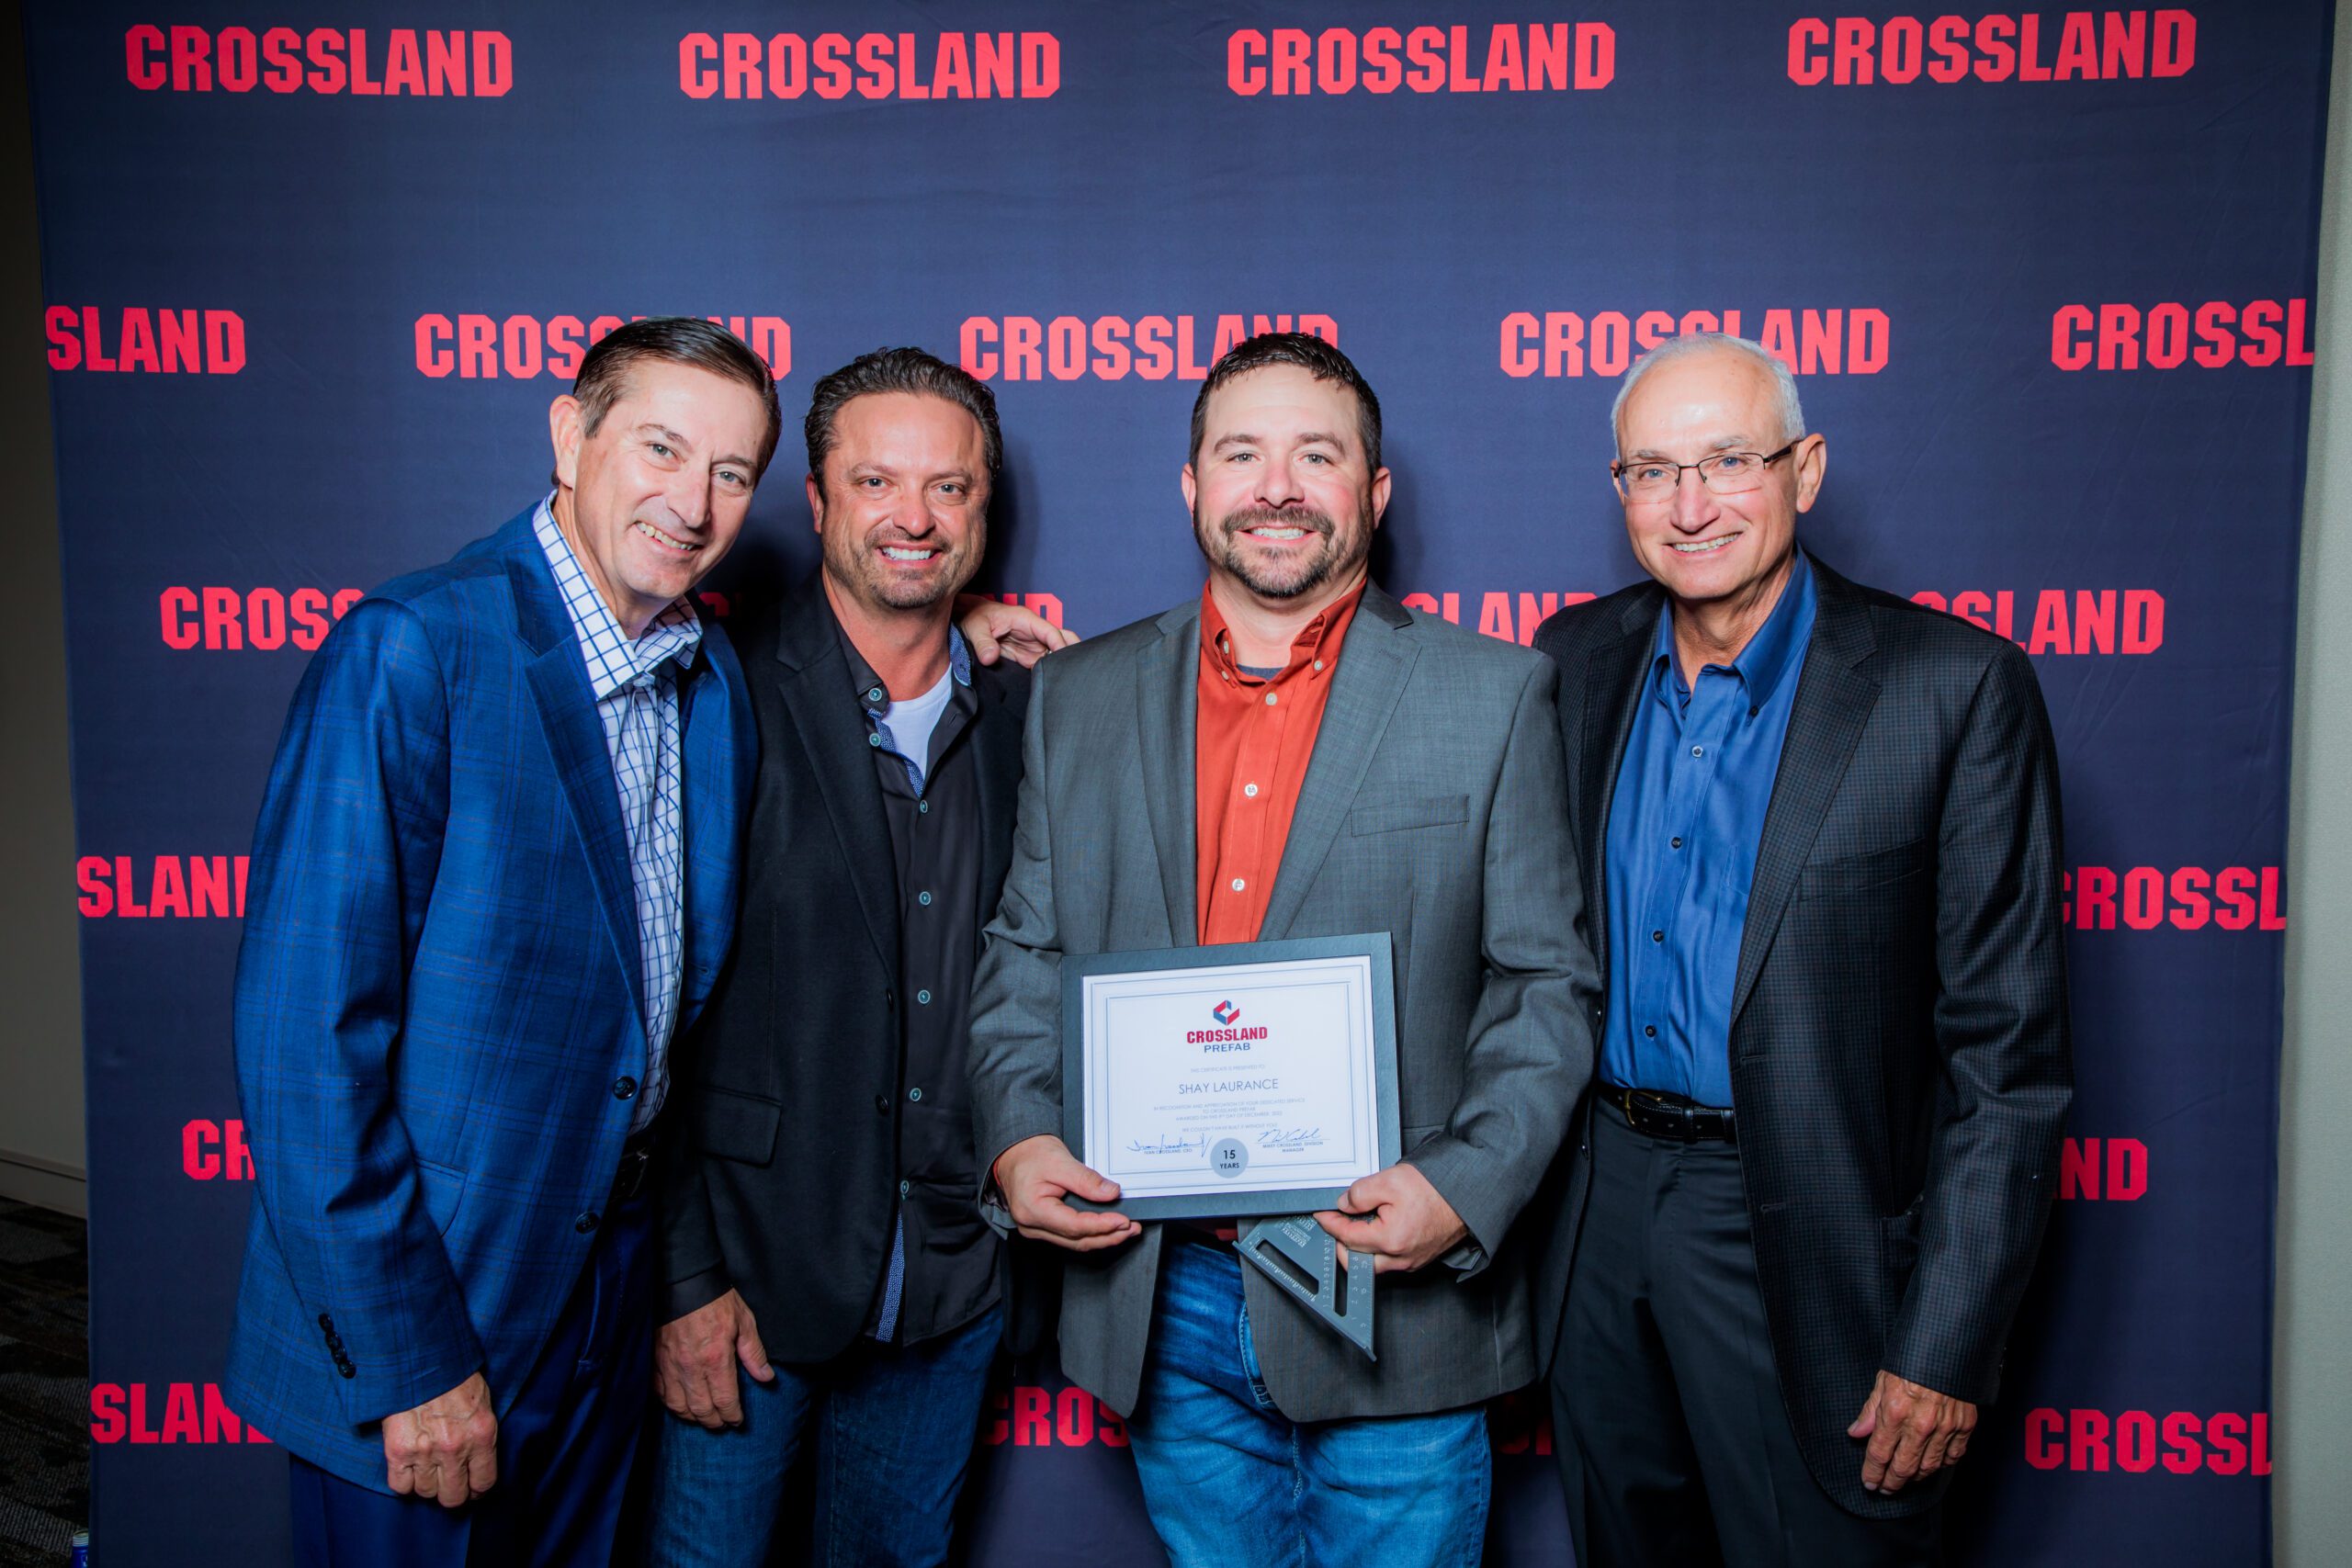 A group of men posing for a picture in front of a Crossland banner.